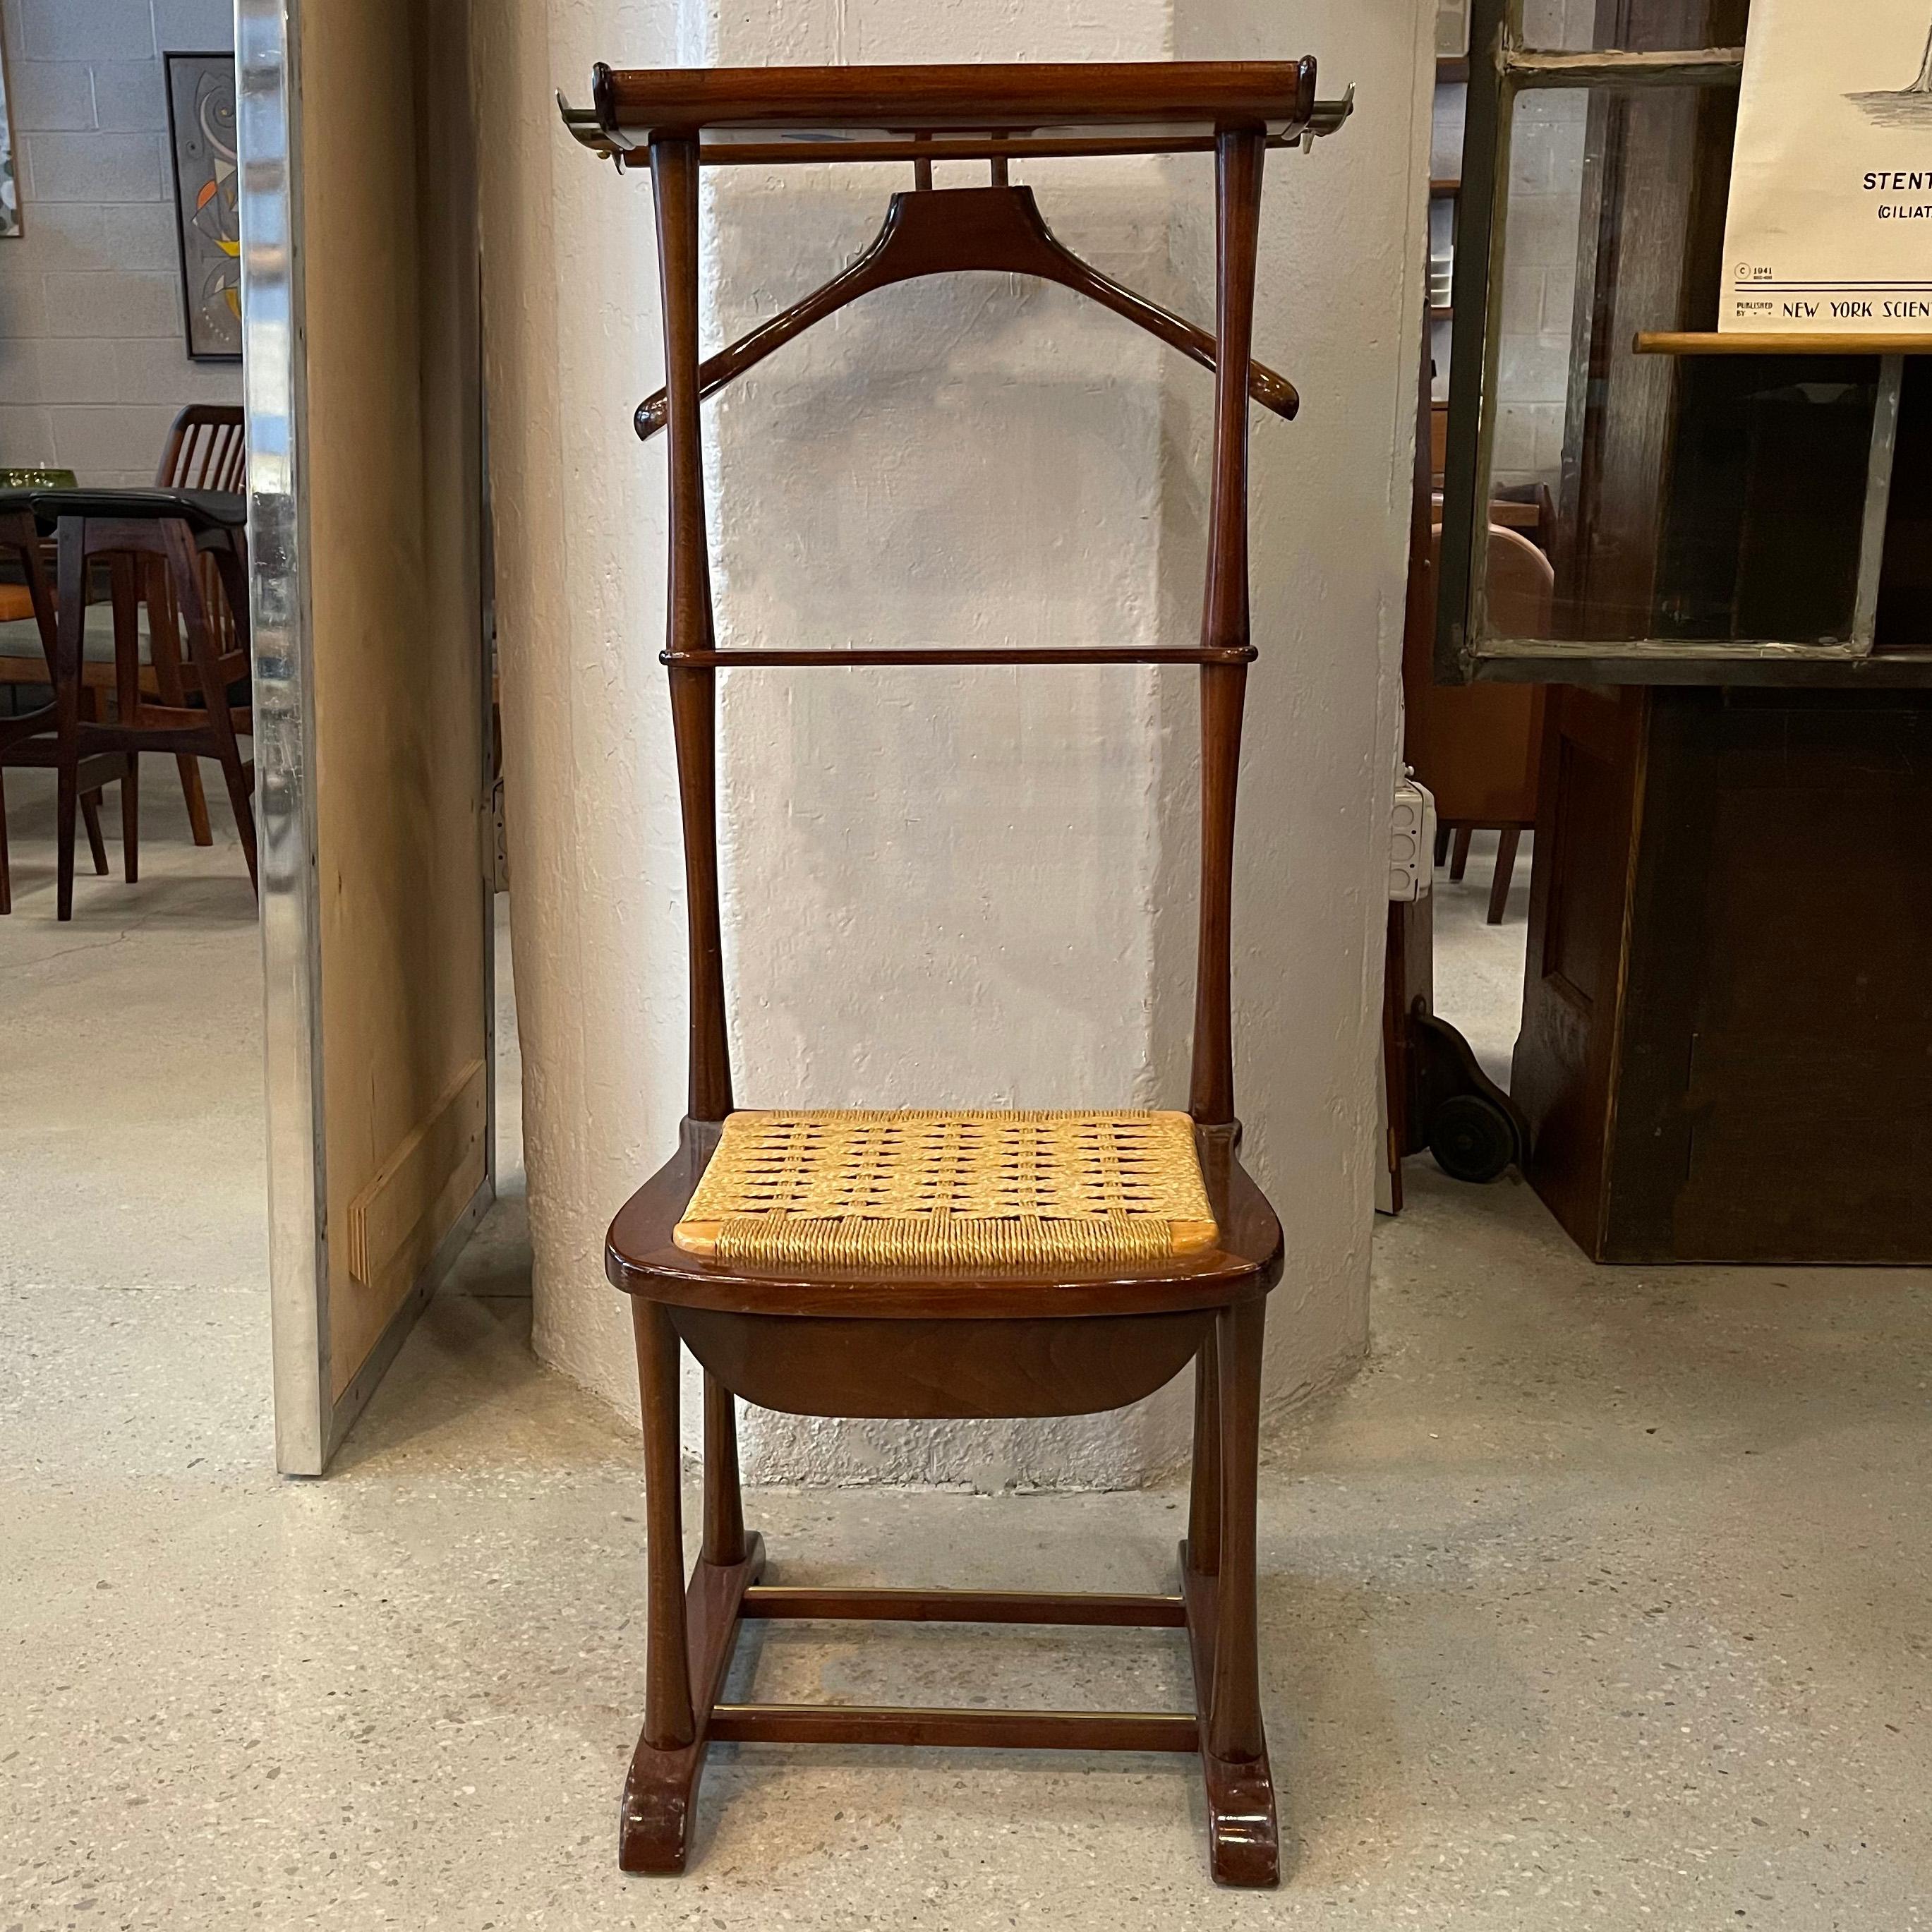 Italian, Mid-Century Modern, birch clothing stand, valet chair by SPQR features a woven rattan seat with drawer, tray top and removable hanger. The seat height is 16 inches.